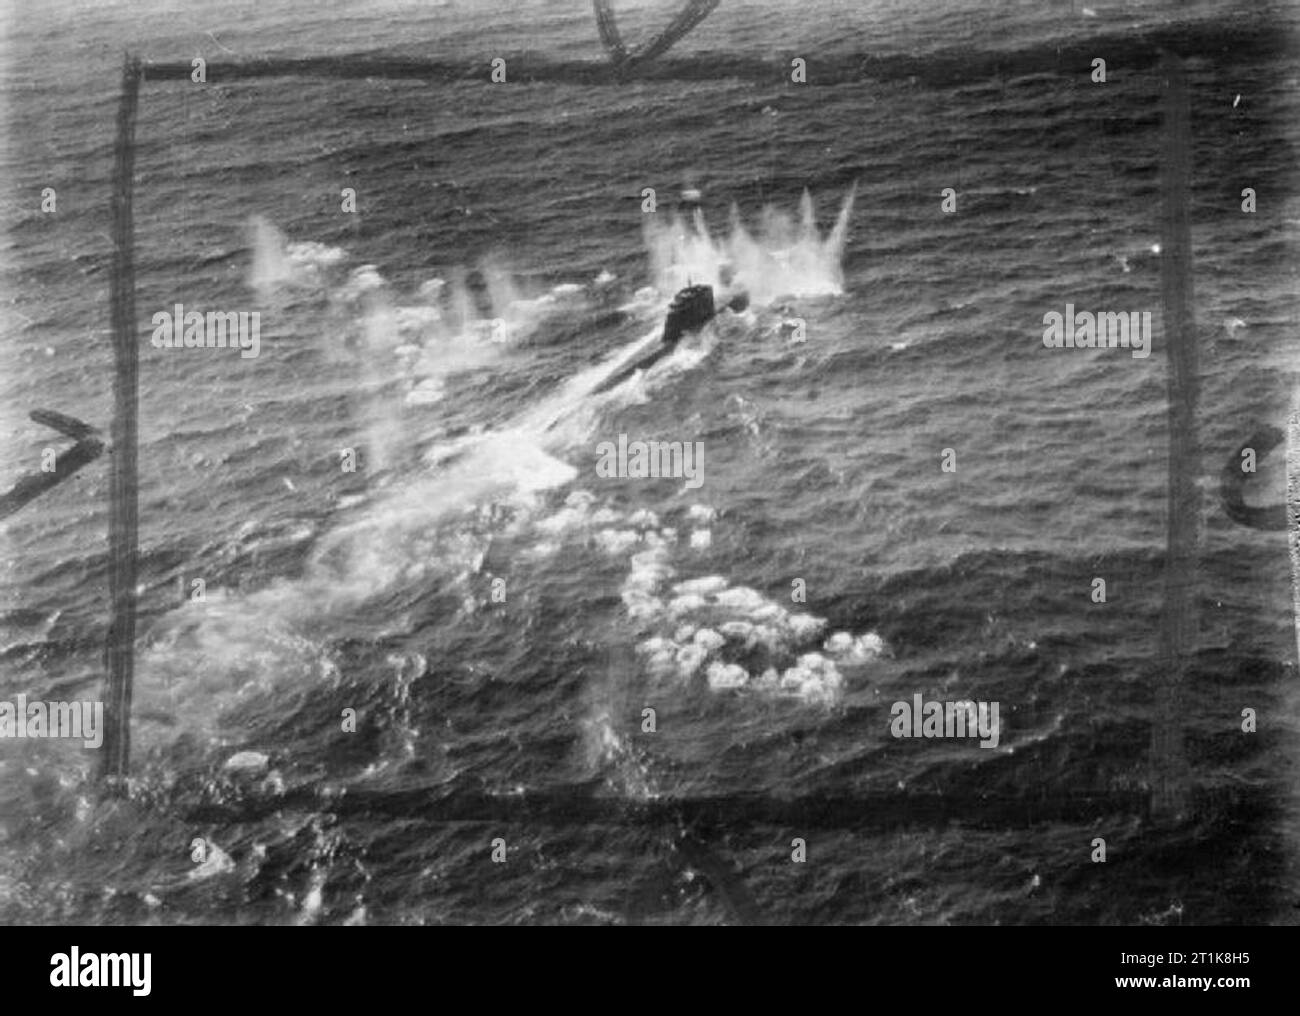 Royal Air Force Coastal Command, 1939-1945. A German type XXI submarine, U-2502, comes under cannon fire from a De Havilland Mosquito FB Mark VI during an attack on four surfaced U-boats and an M-class minsweeper escort in the Kattegat by 22 Mosquitos of the Banff Strike Wing. U-2502 received only slight damage, but a type VIIC submarine was sunk, a type XXIII seriously damaged and the minesweeper left burning. Stock Photo